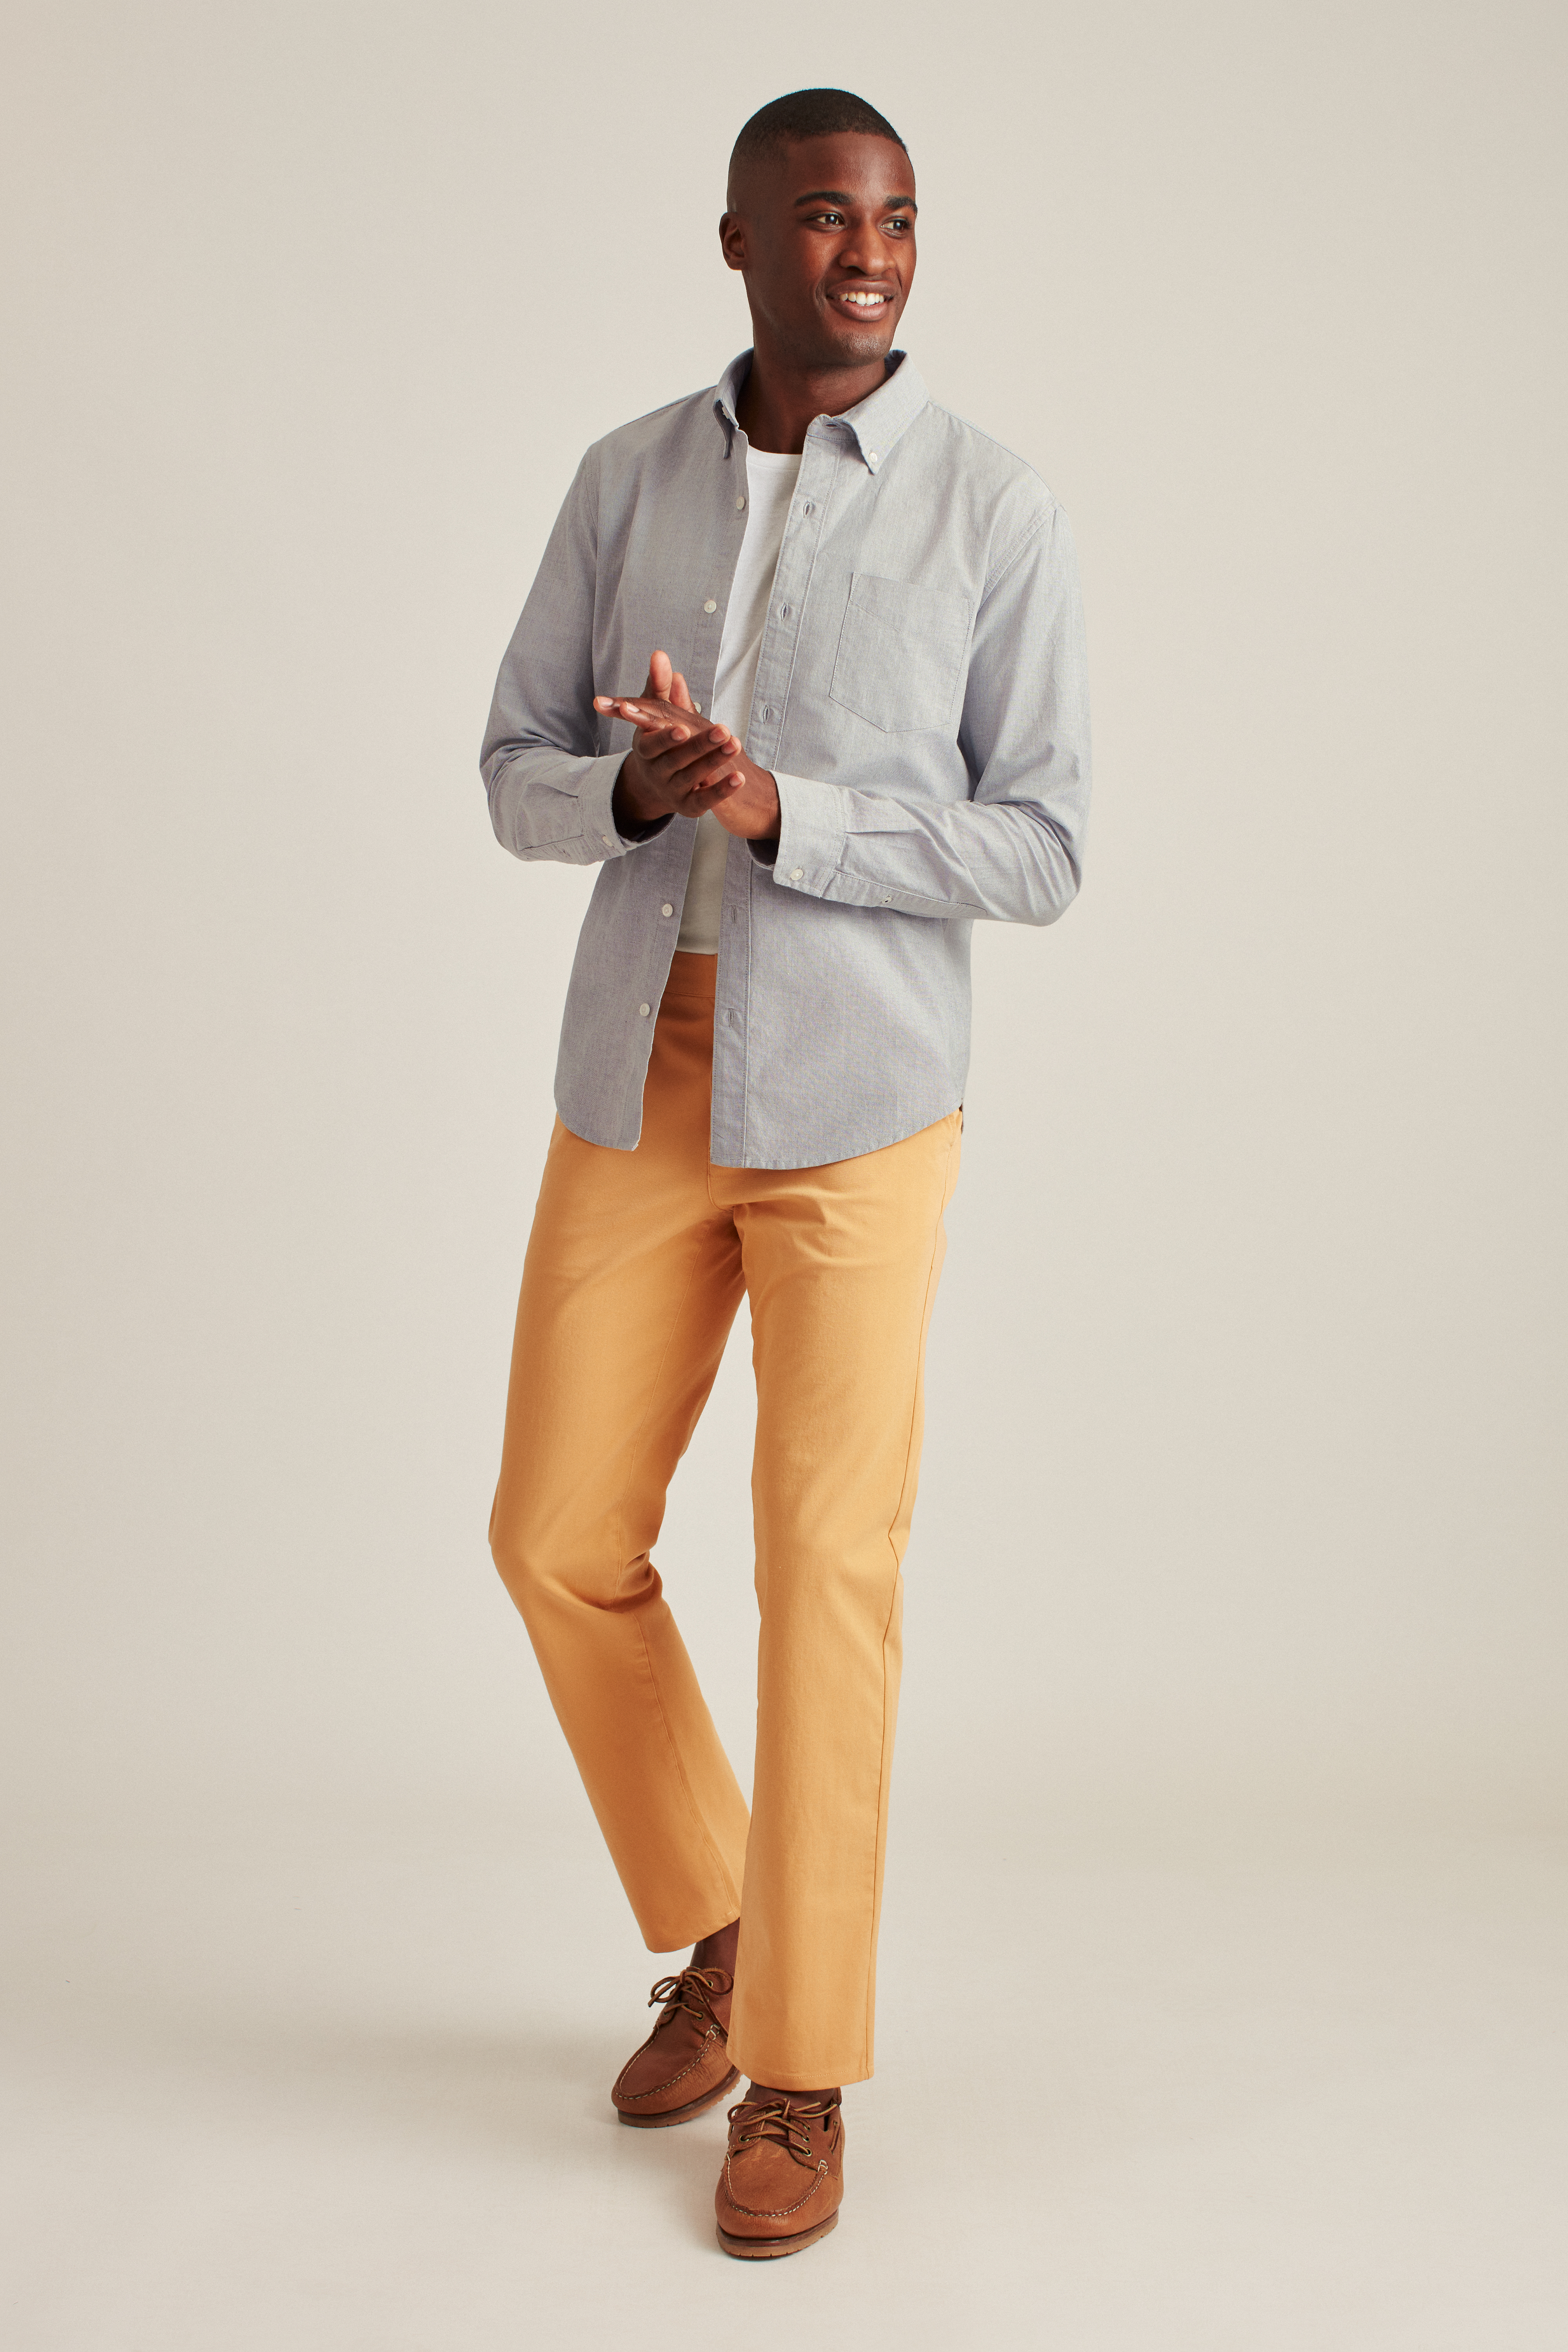 Everyday Oxford Shirt: Classic Oxford Button Down